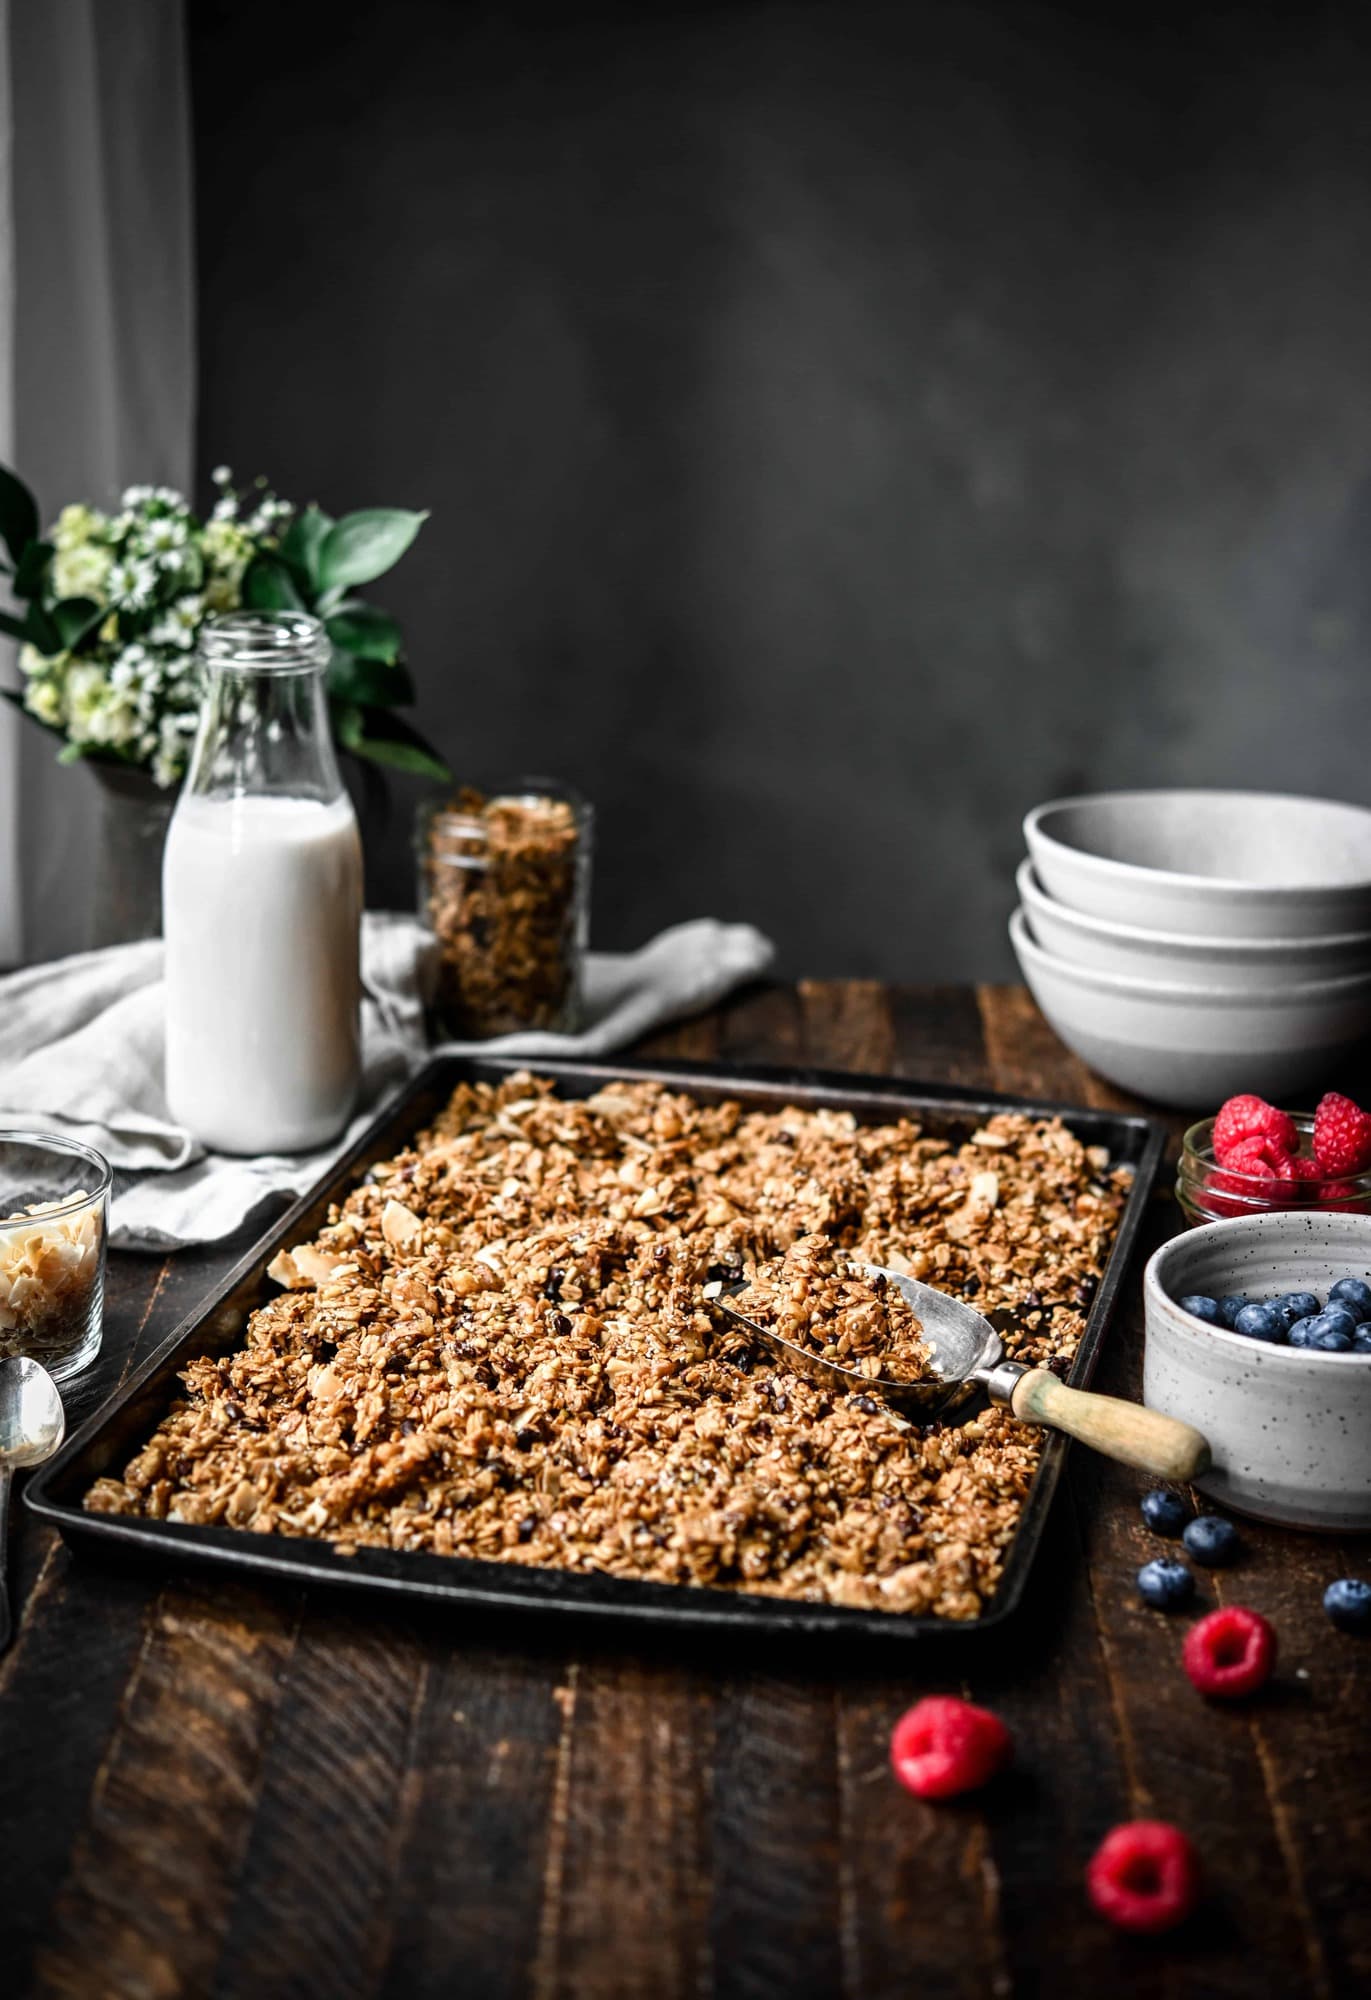 Side view of a baking sheet with granola and a scoop on a wood table with greenery in background